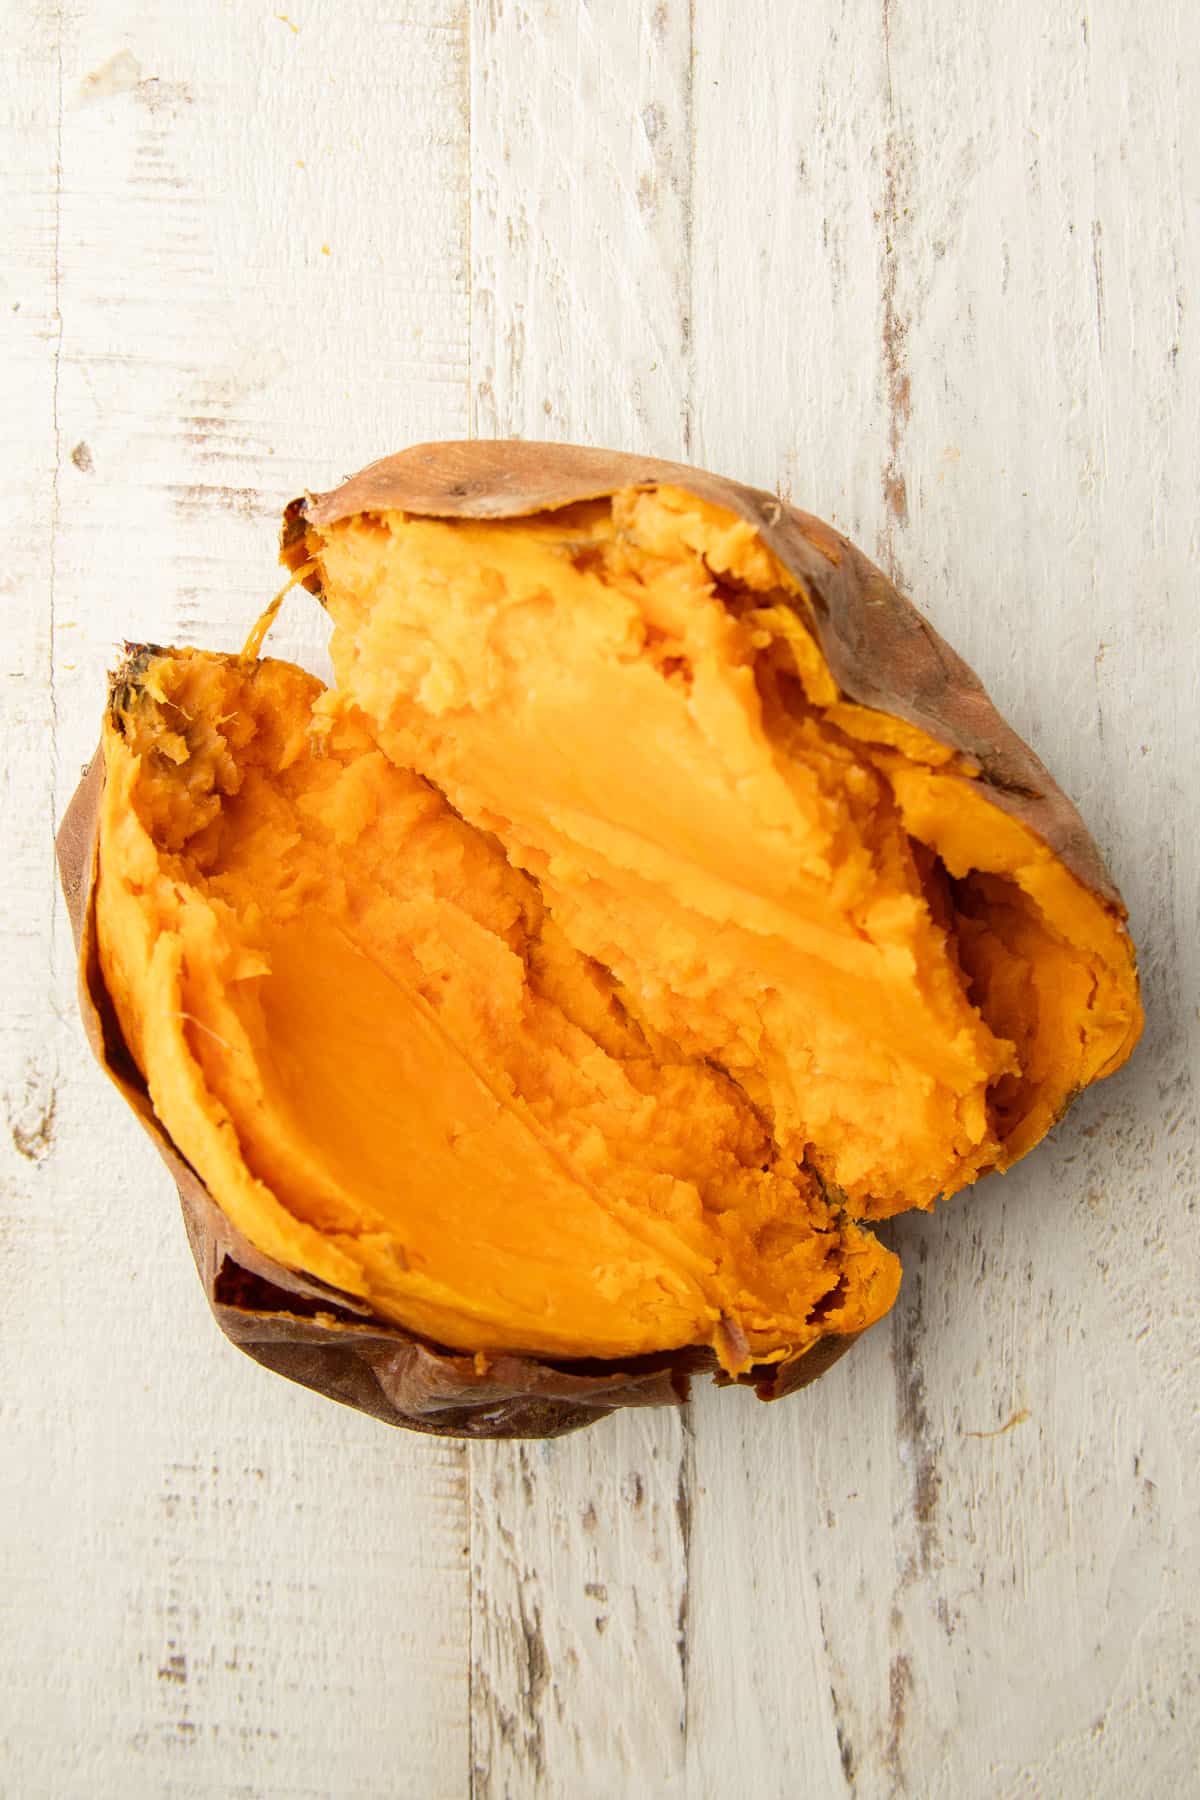 Baked sweet potato that's been cut open on a white wooden surface.